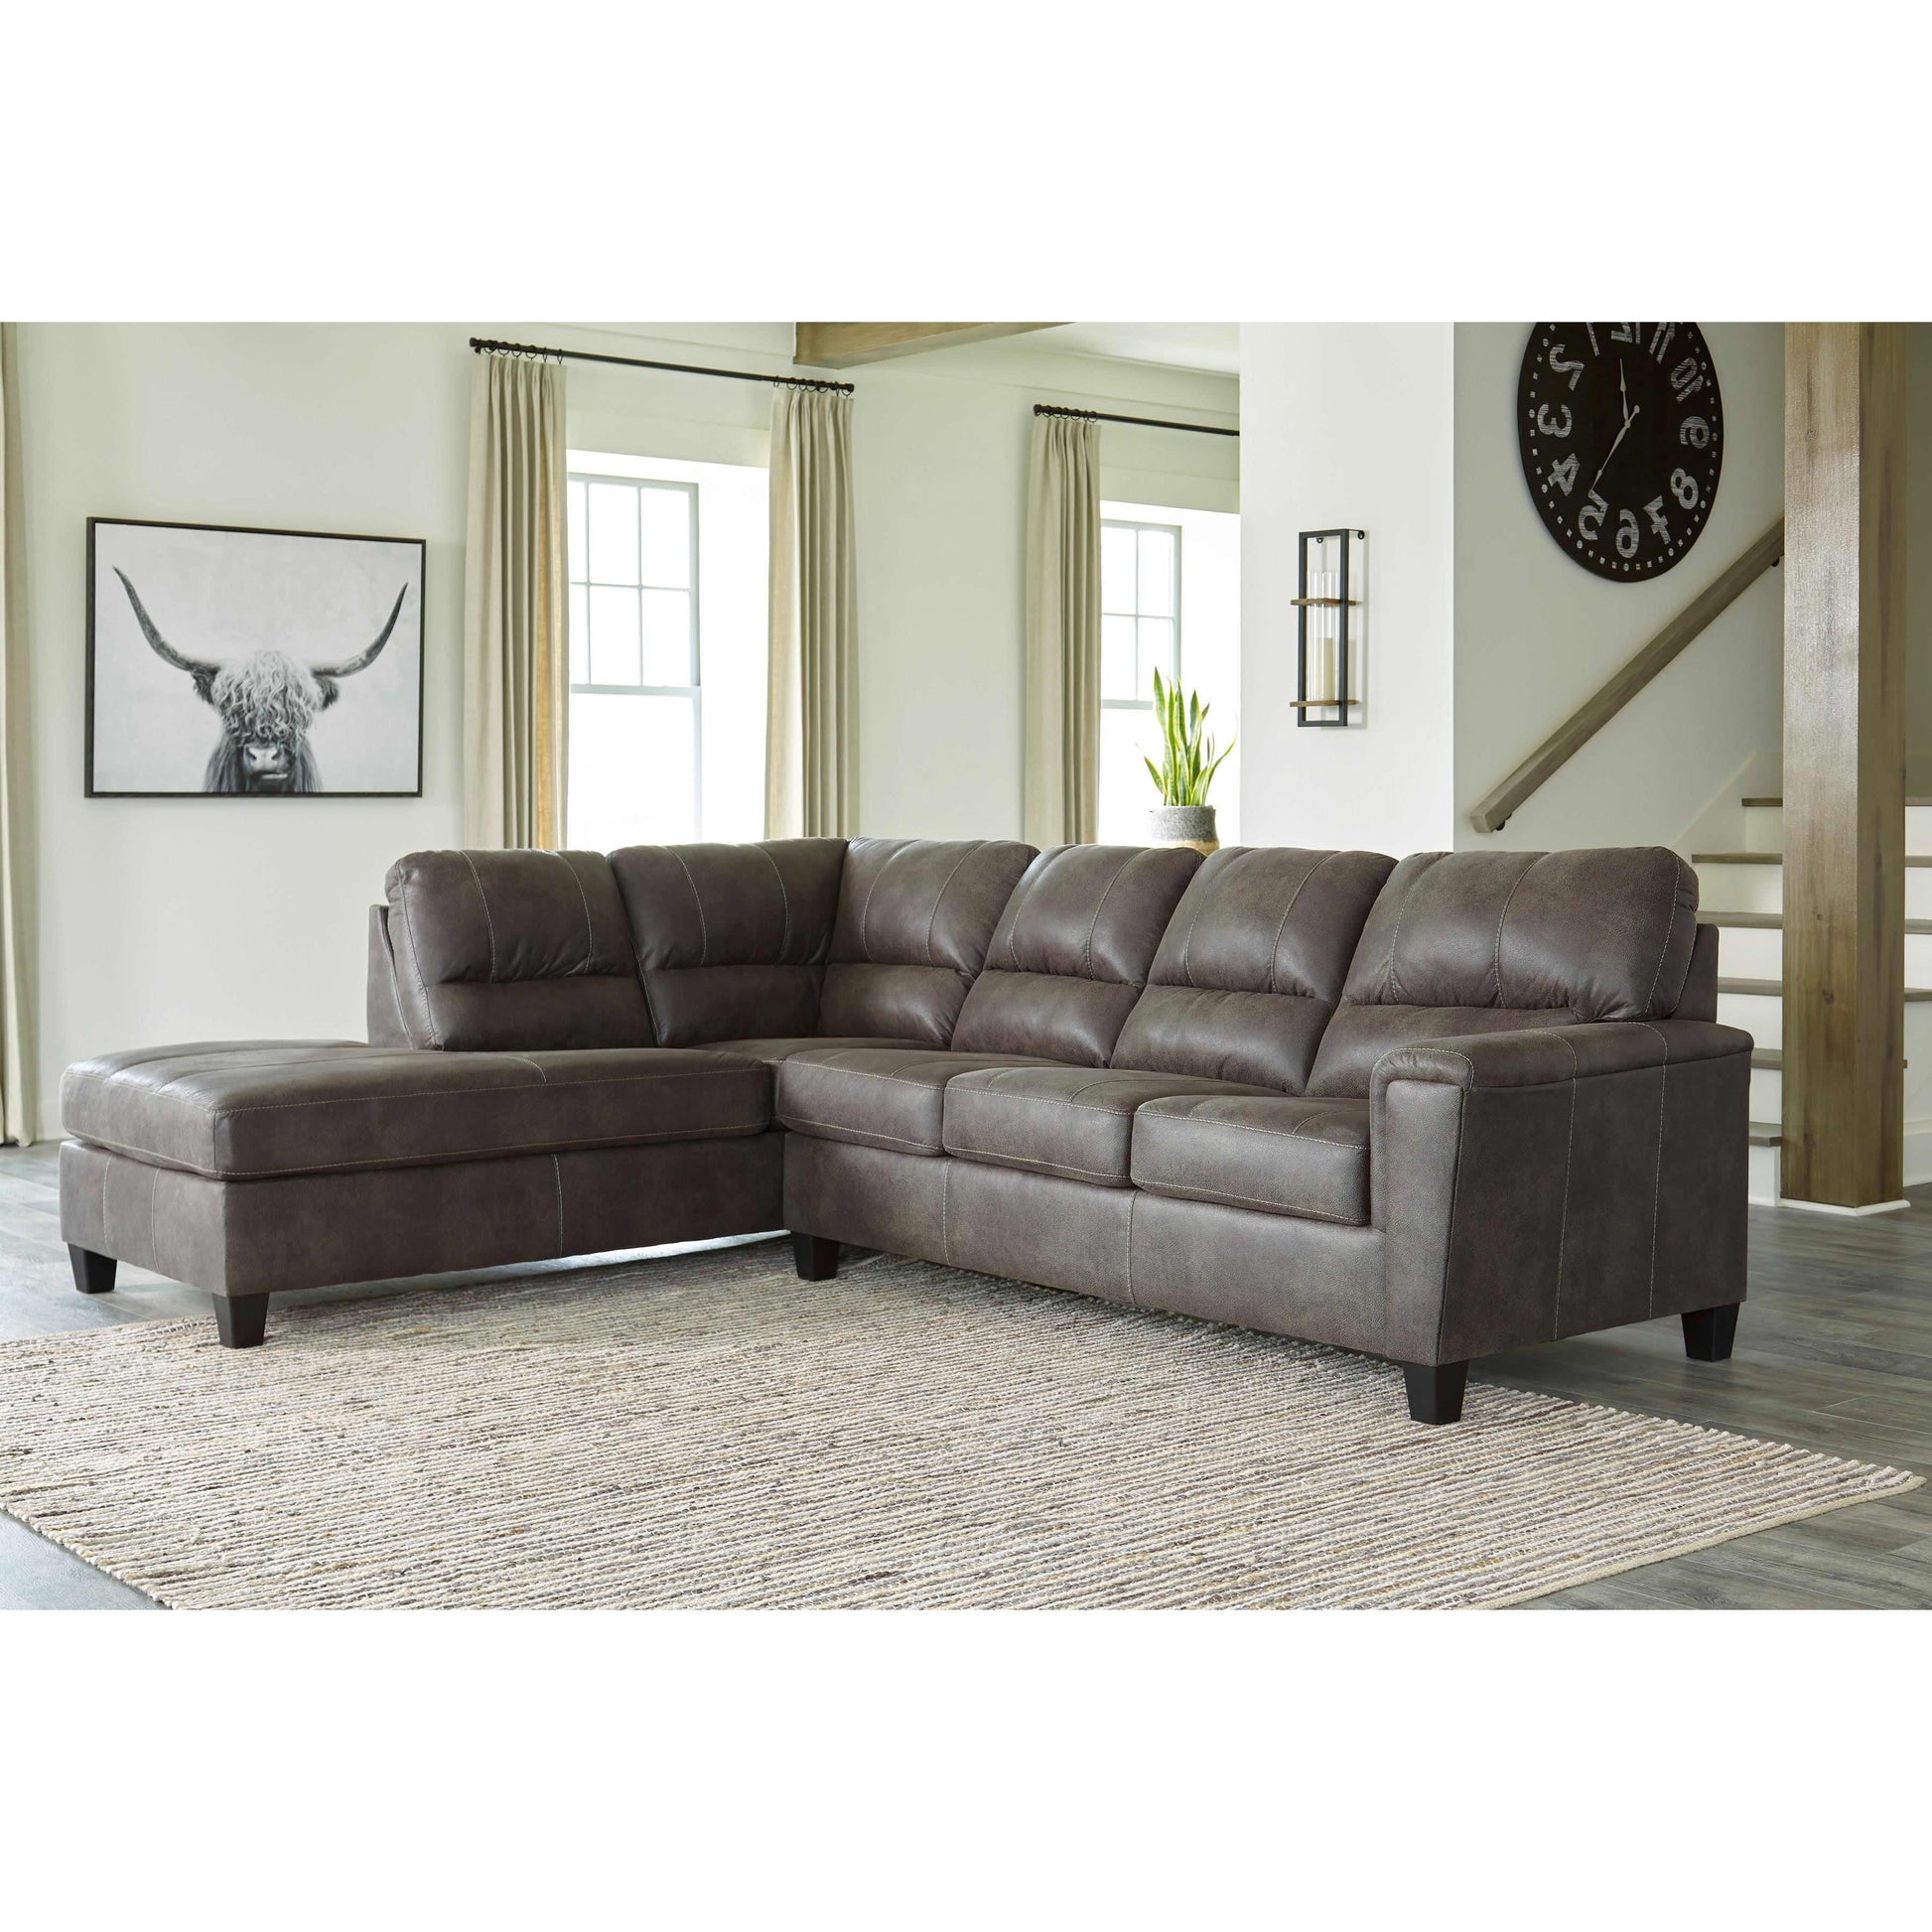 Signature Design by Ashley Navi Leather Look Sleeper Sectional 9400216/9400270